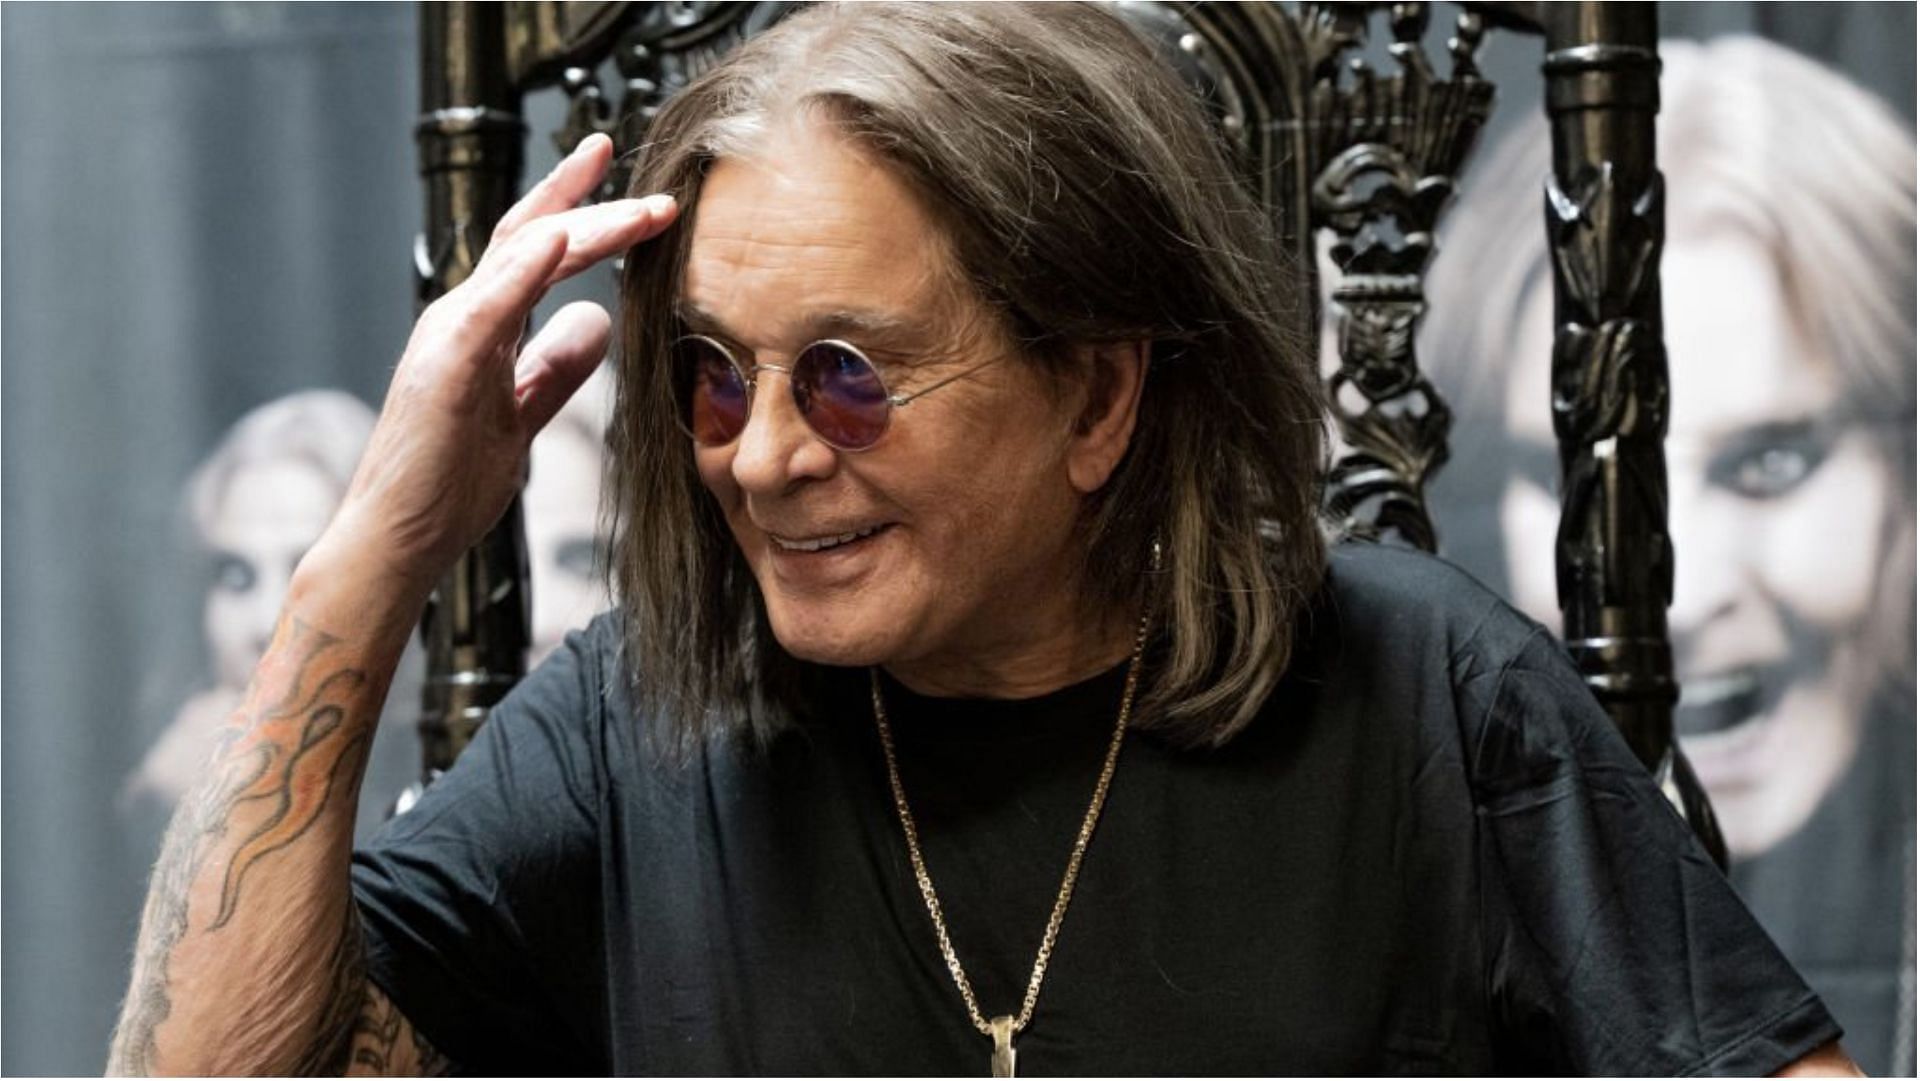 Ozzy Osbourne has retired from touring for his health issues (Image via Scott Dudelson/Getty Images)